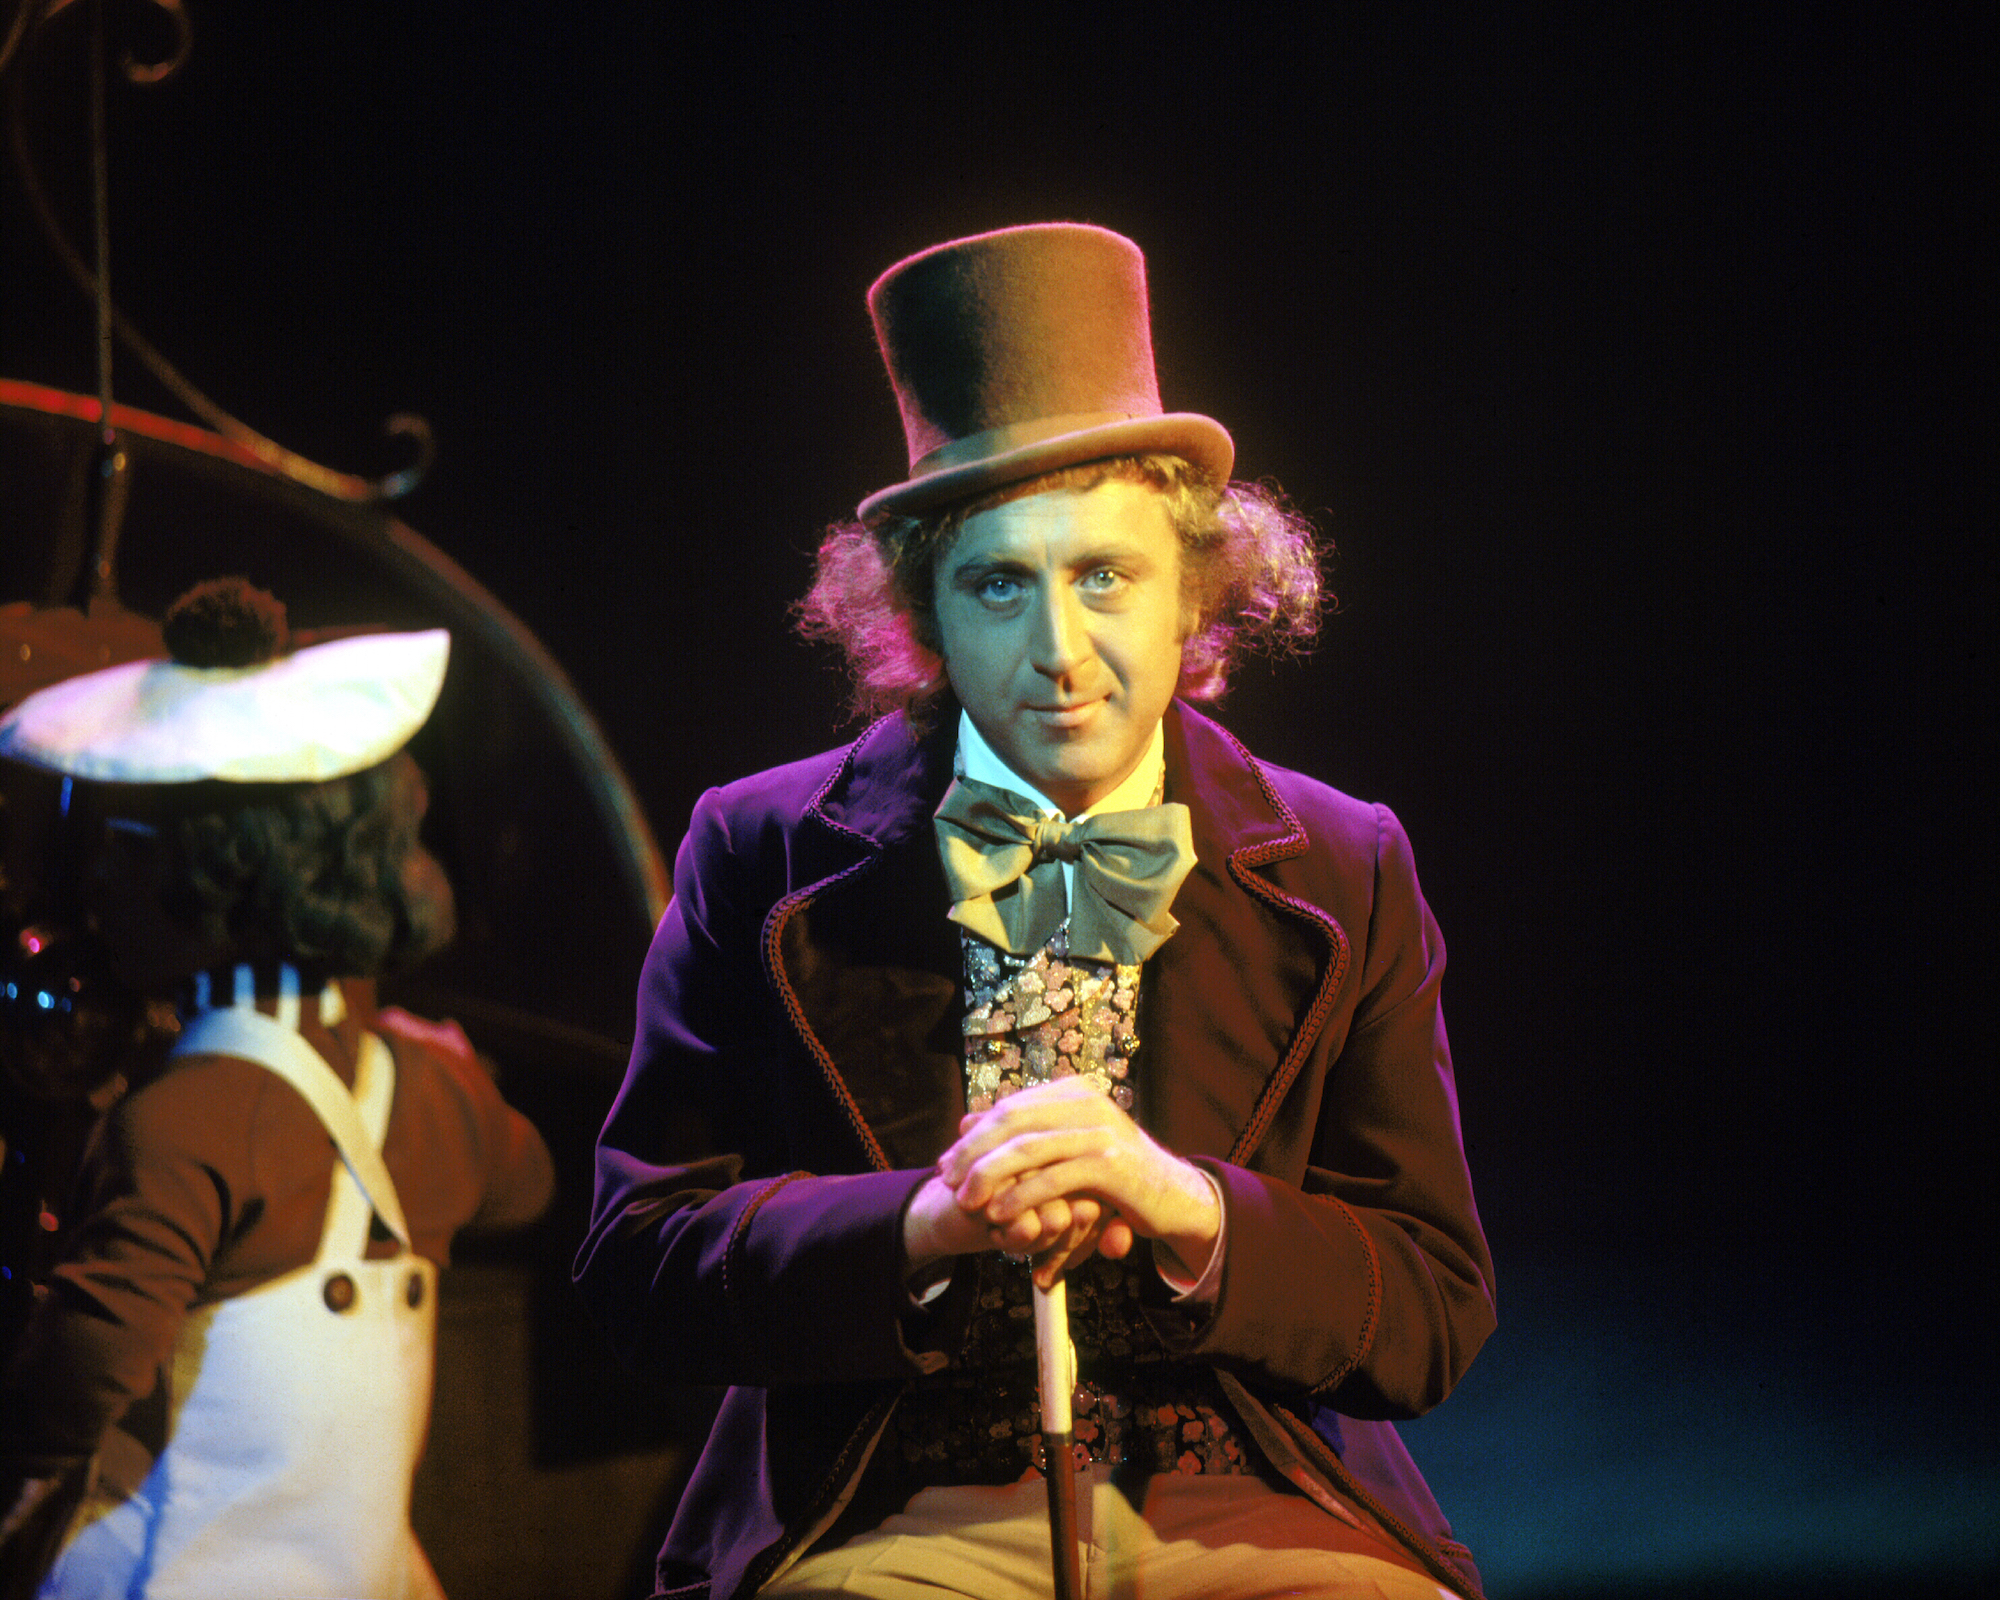 Gene Wilder, dressed in his Willy Wonka costume from Willy Wonka & the Chocolate Factory (1971), looks directly at the camera. An Oompa Loompa can be seen in the background.